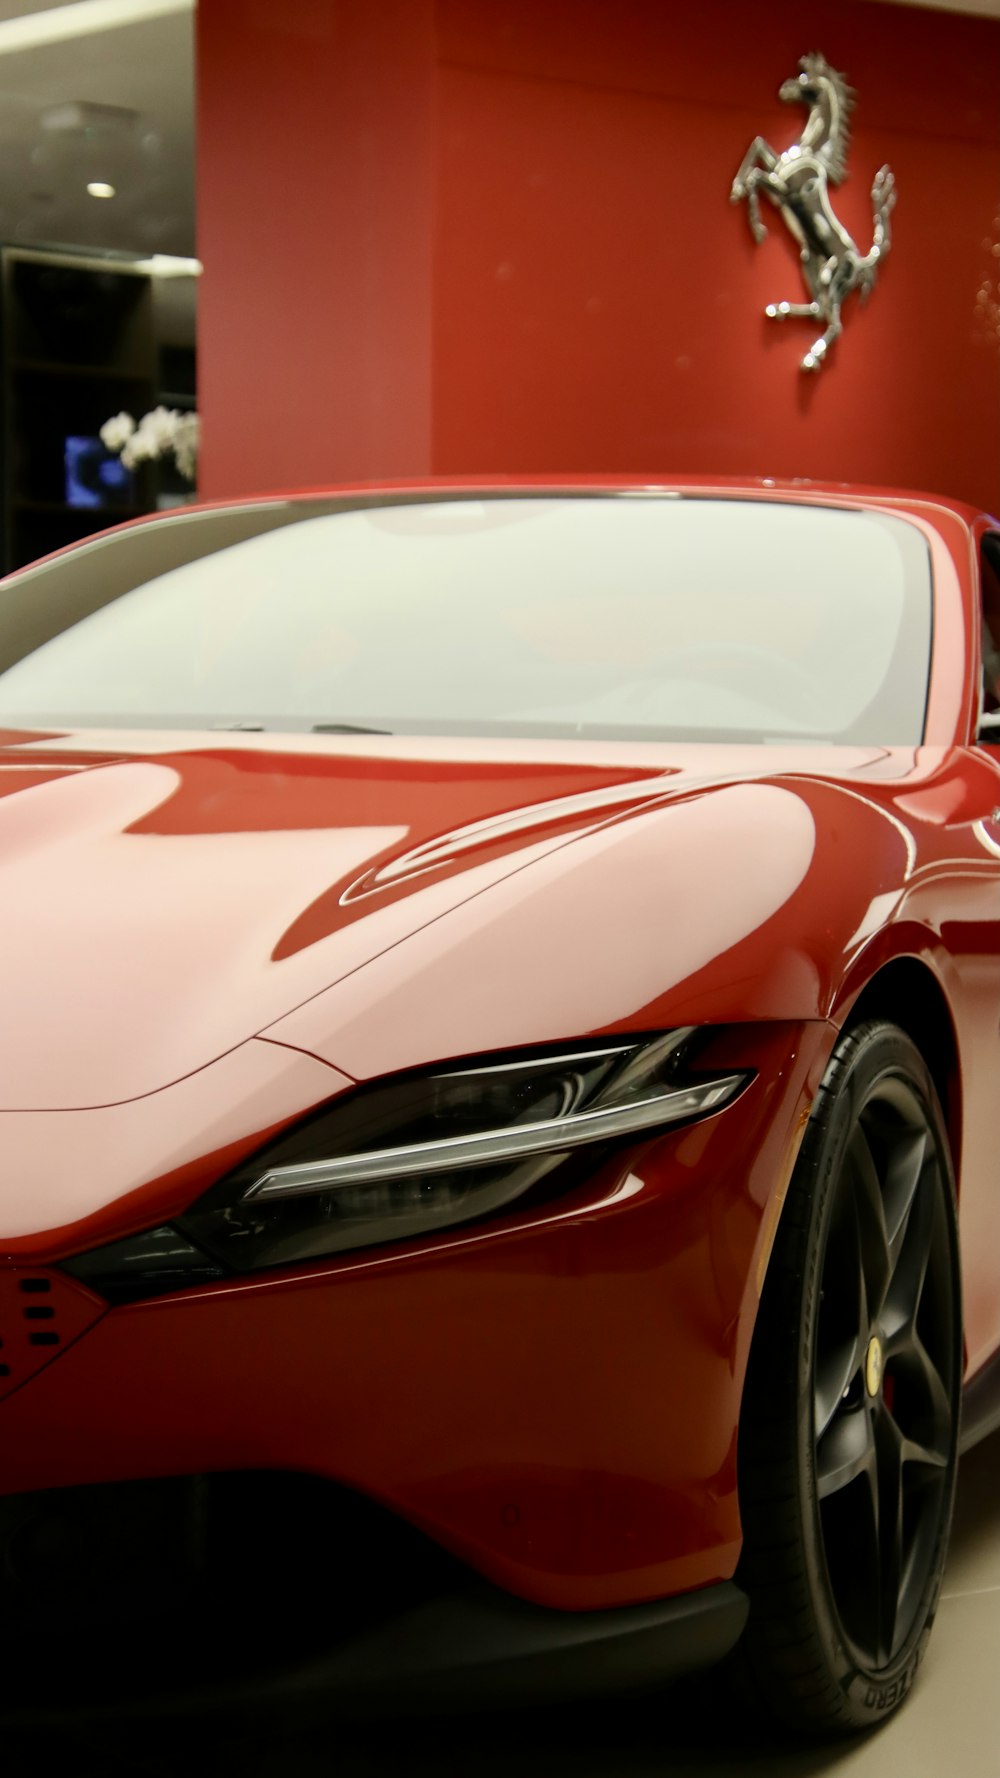 a red sports car parked in a showroom